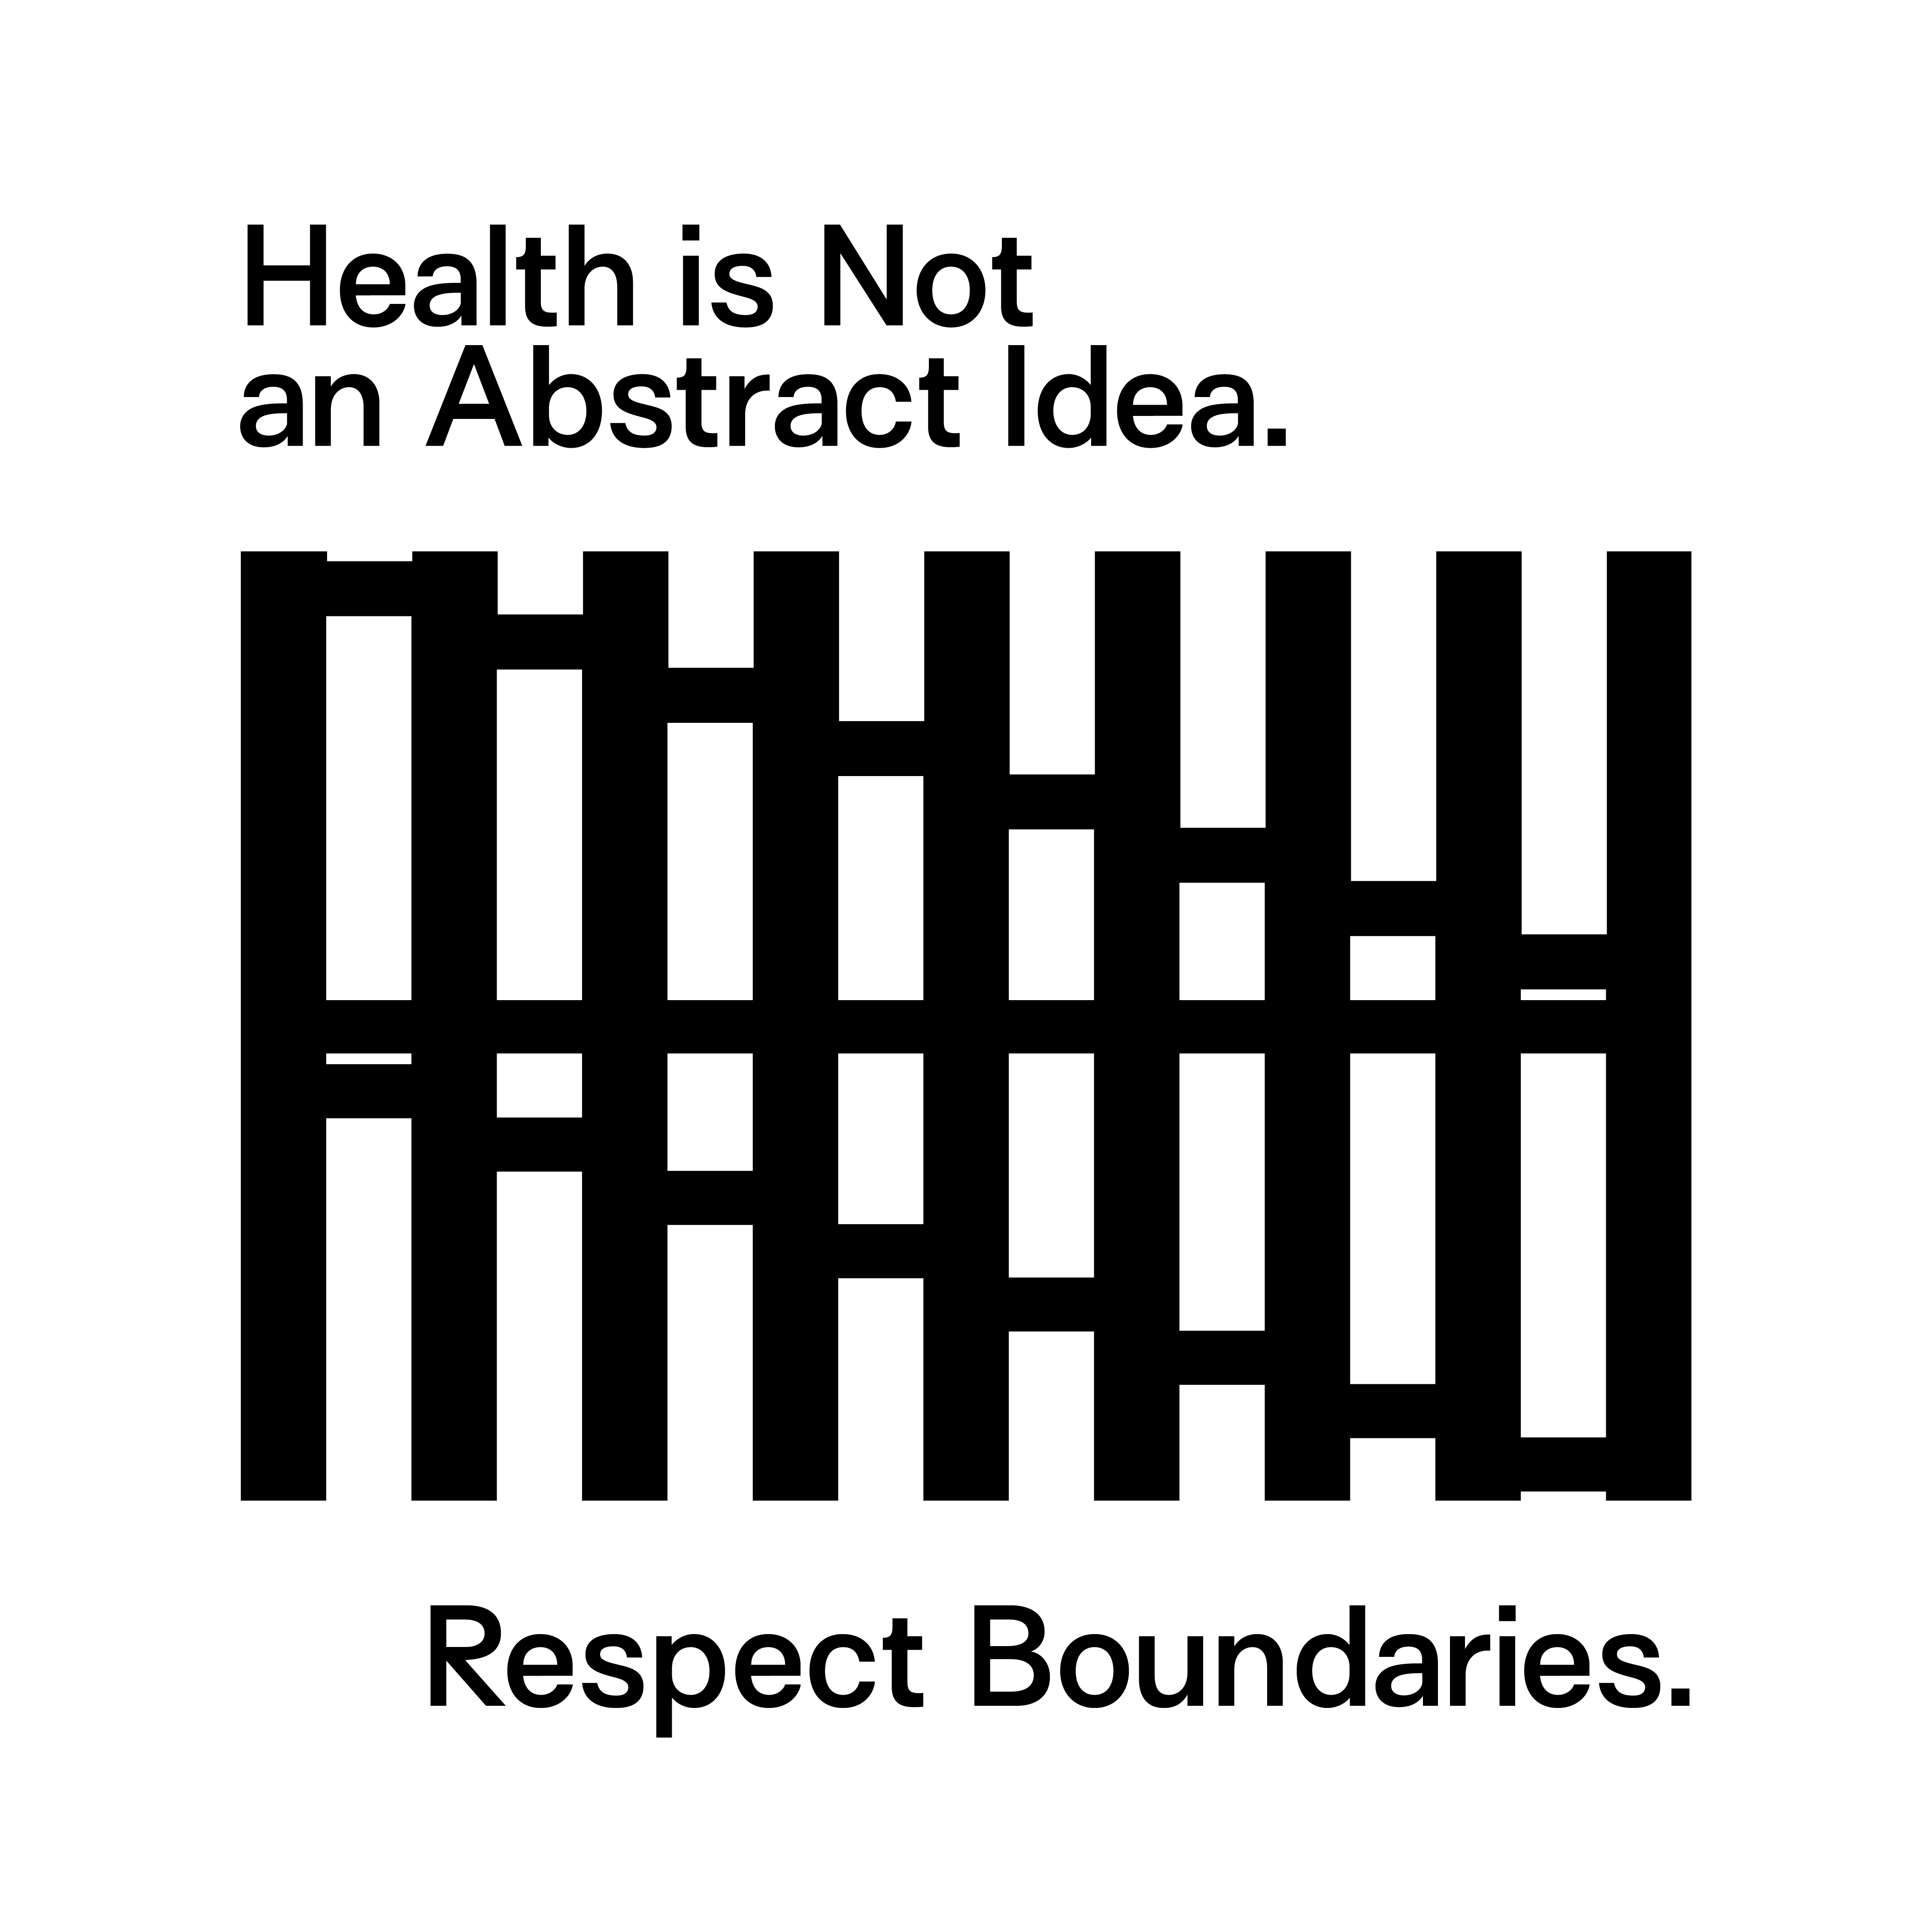 "Health is Not an Abstract Idea" by Jared Maire